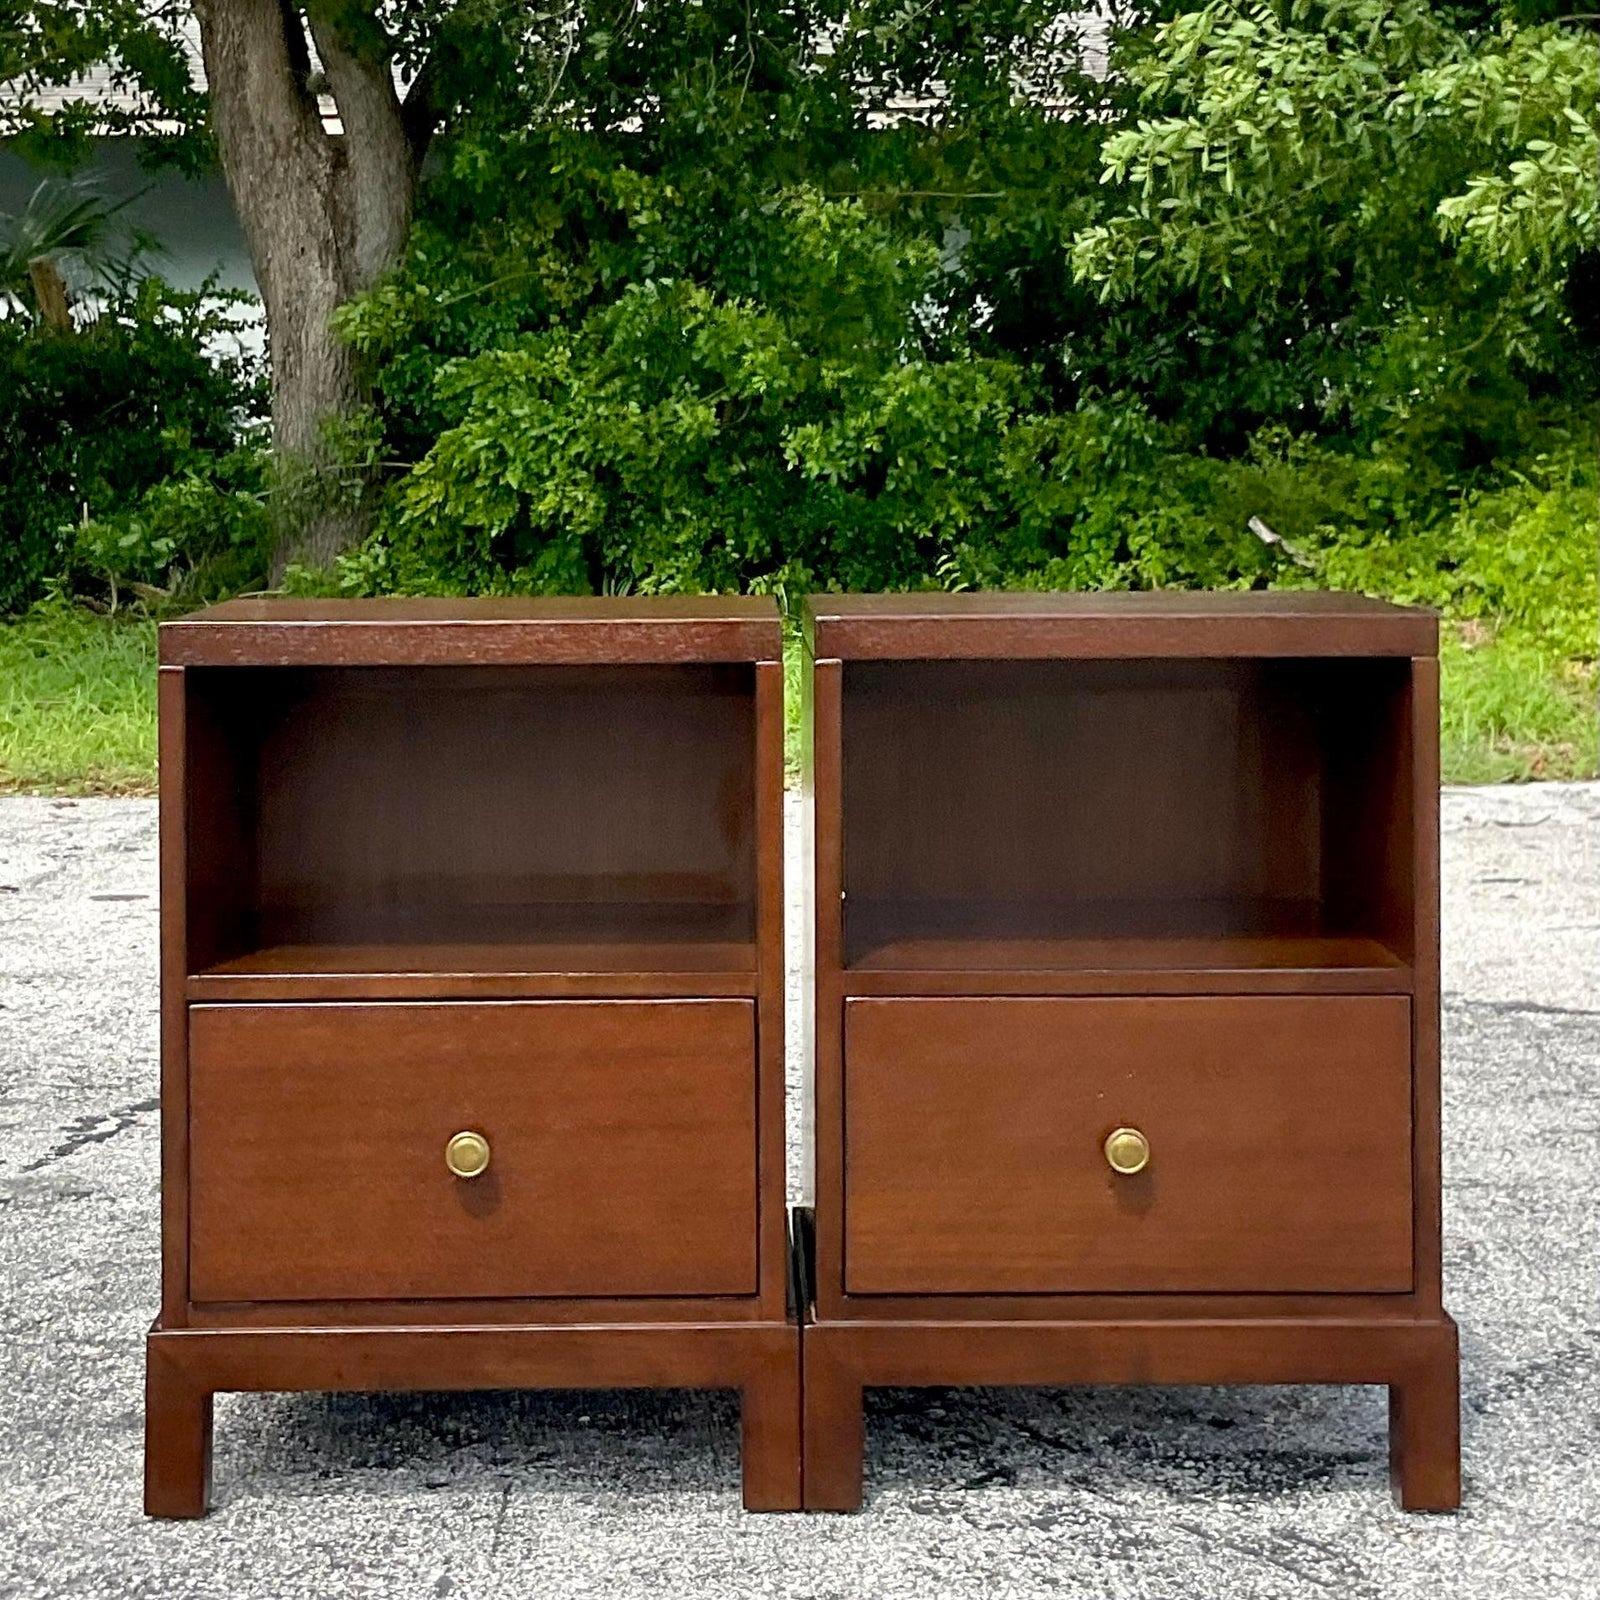 A fabulous pair of vintage MCM nightstands. Chic warm wood with brass hardware. Made by the iconic John a Widdicomb group and tagged inside the drawer. Acquired from a Palm Beach estate.